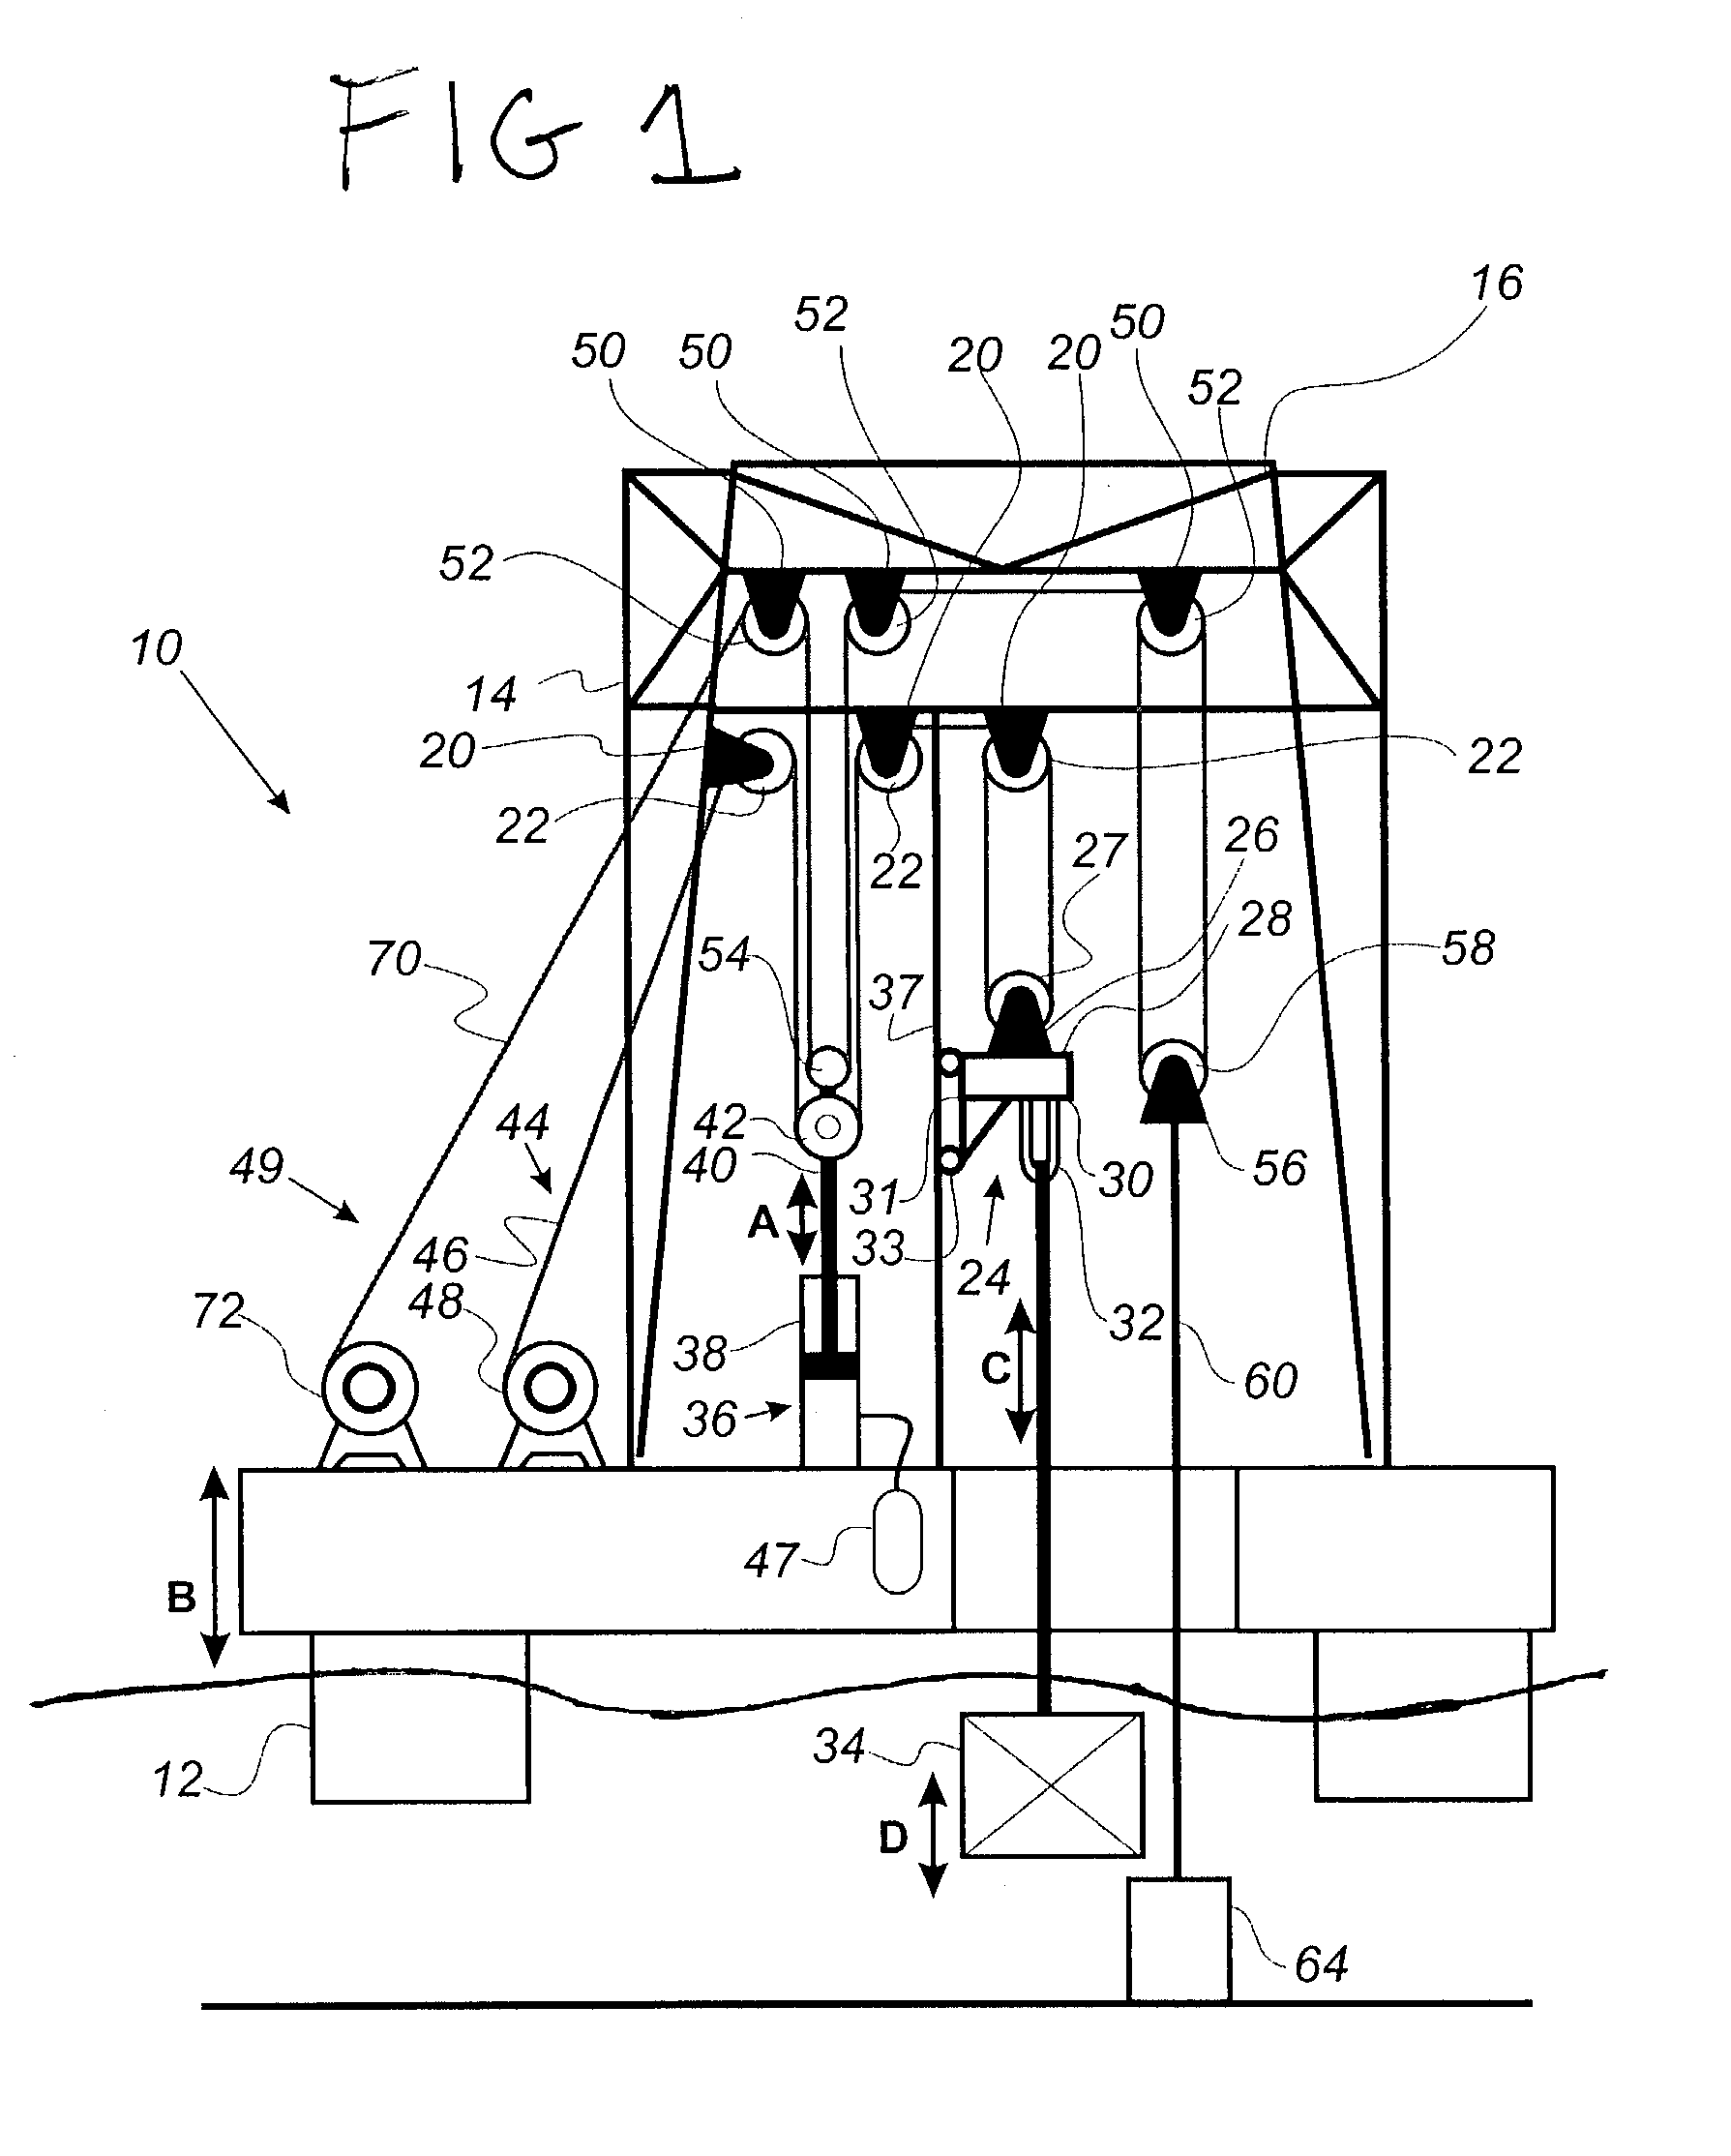 Compensation and hoisting apparatus